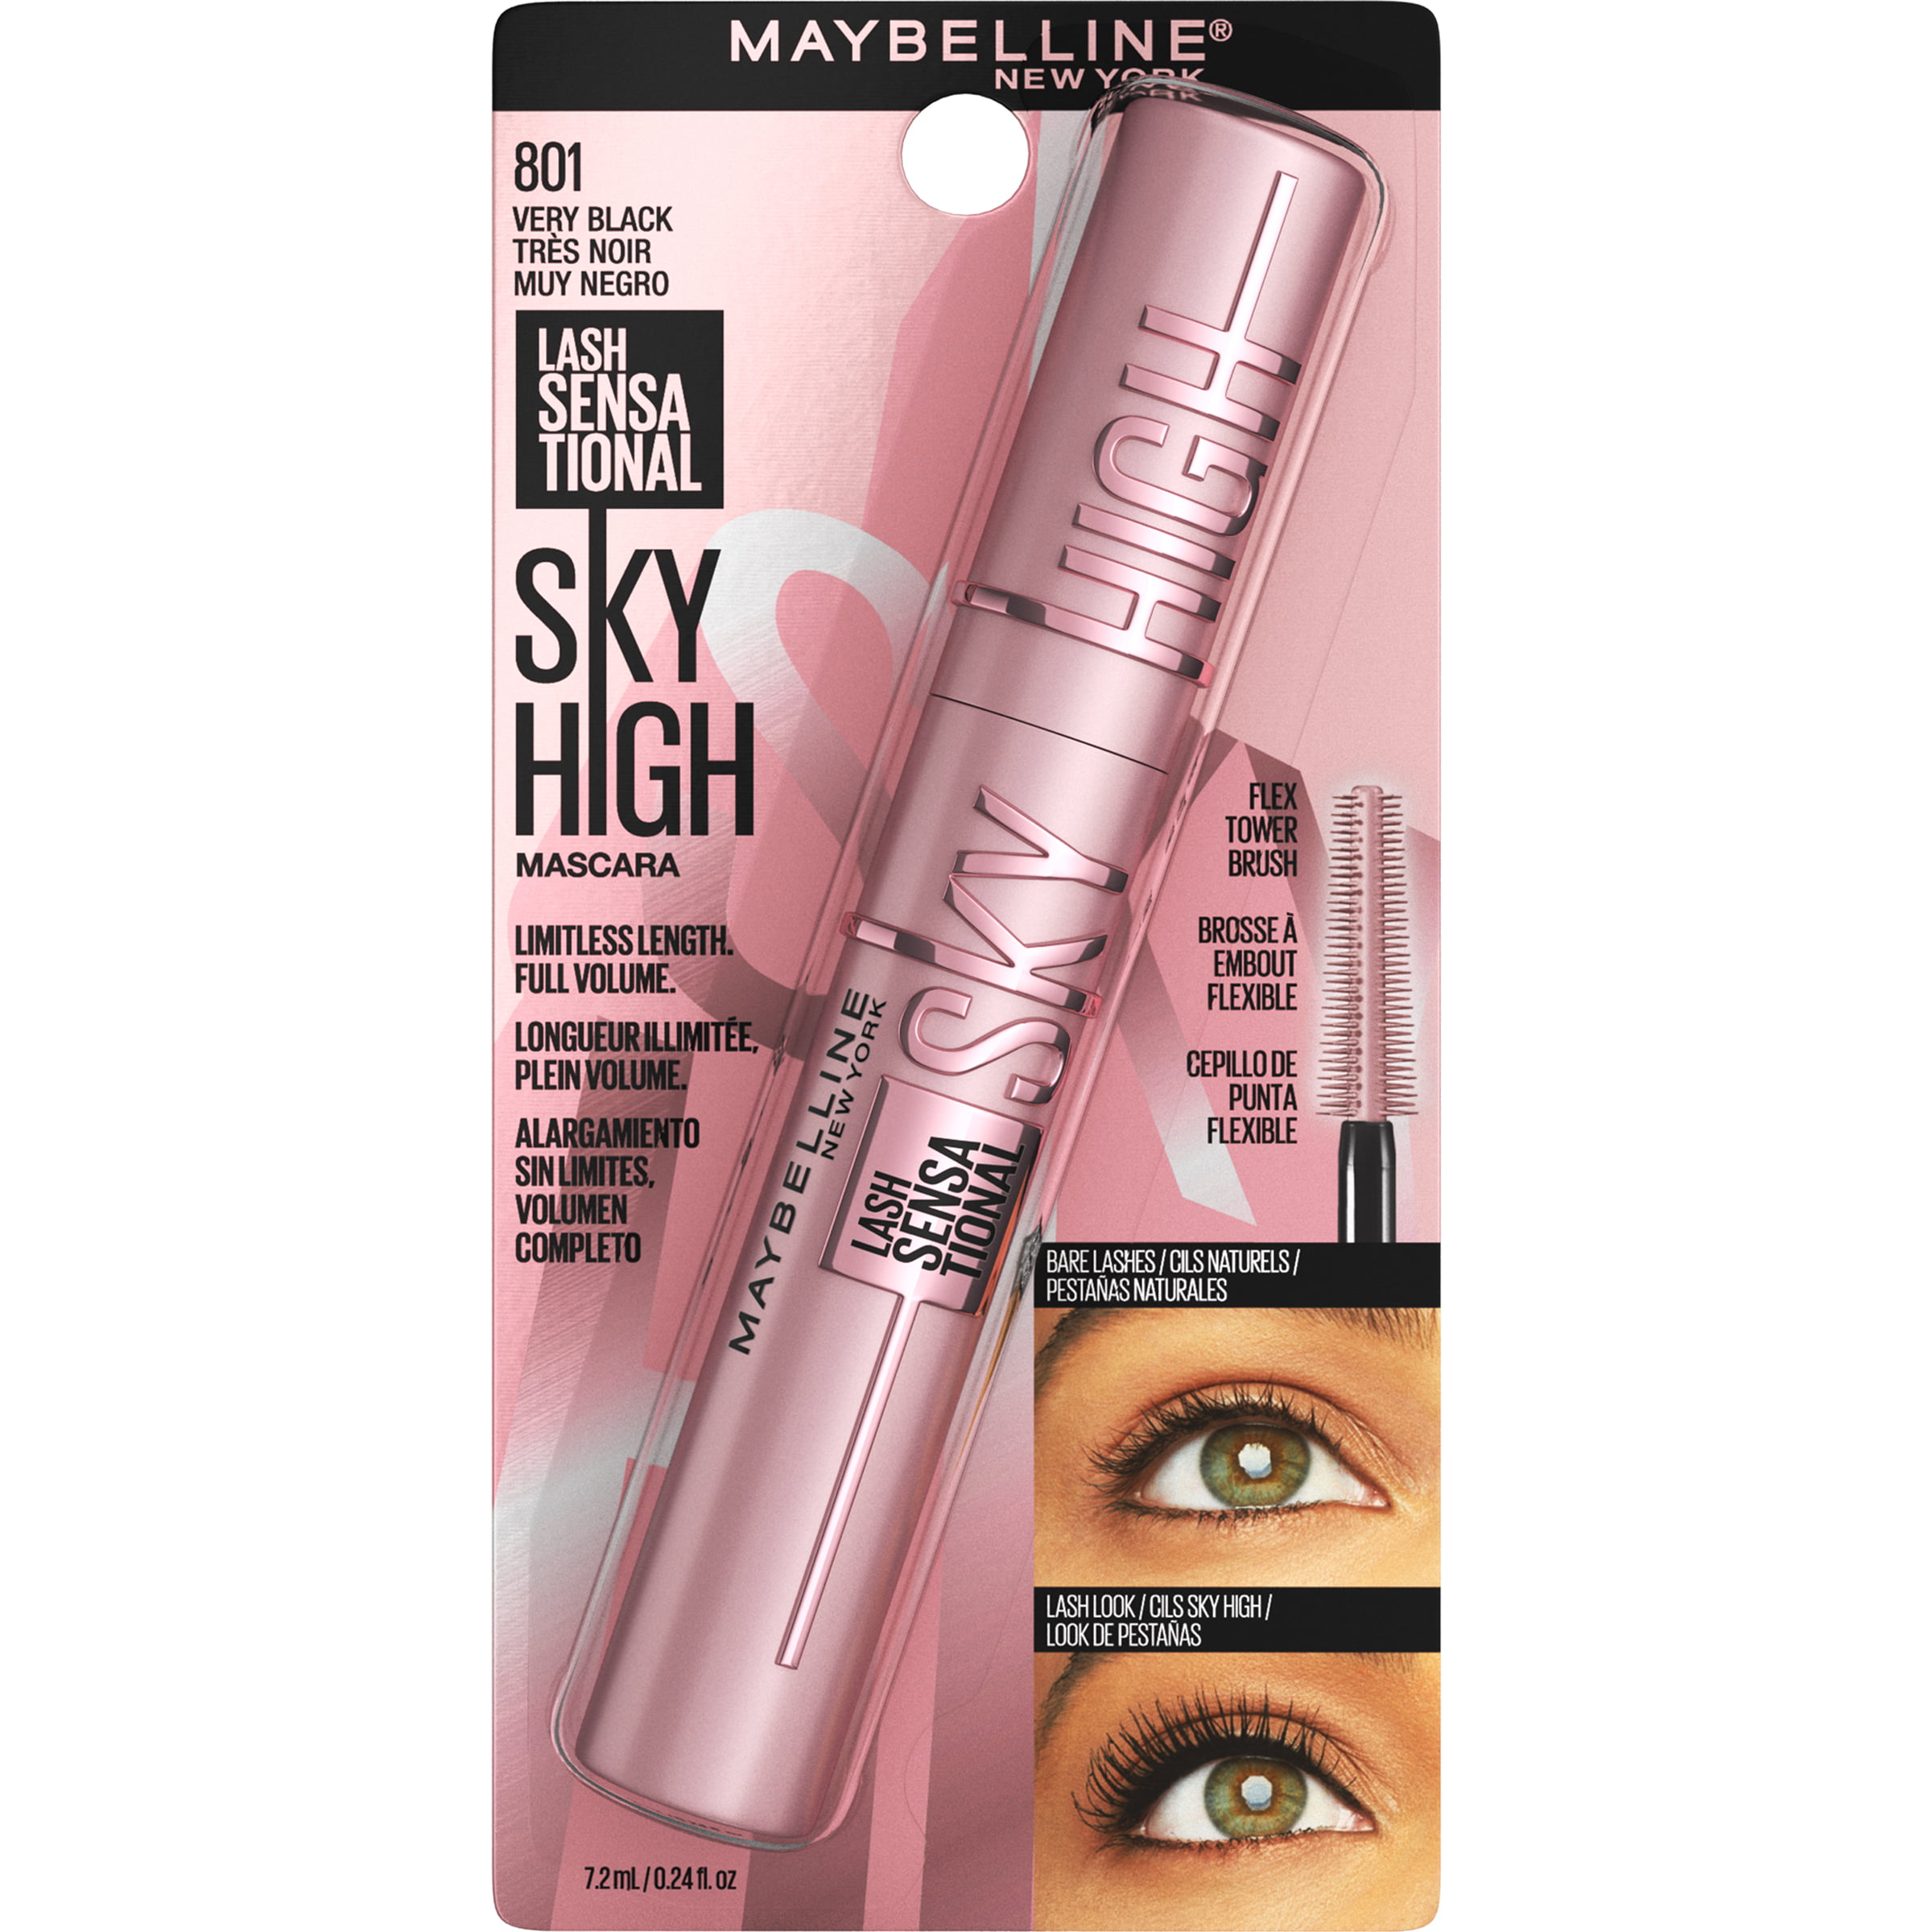 Where Can I Get the Maybelline Sky High Mascara? 2